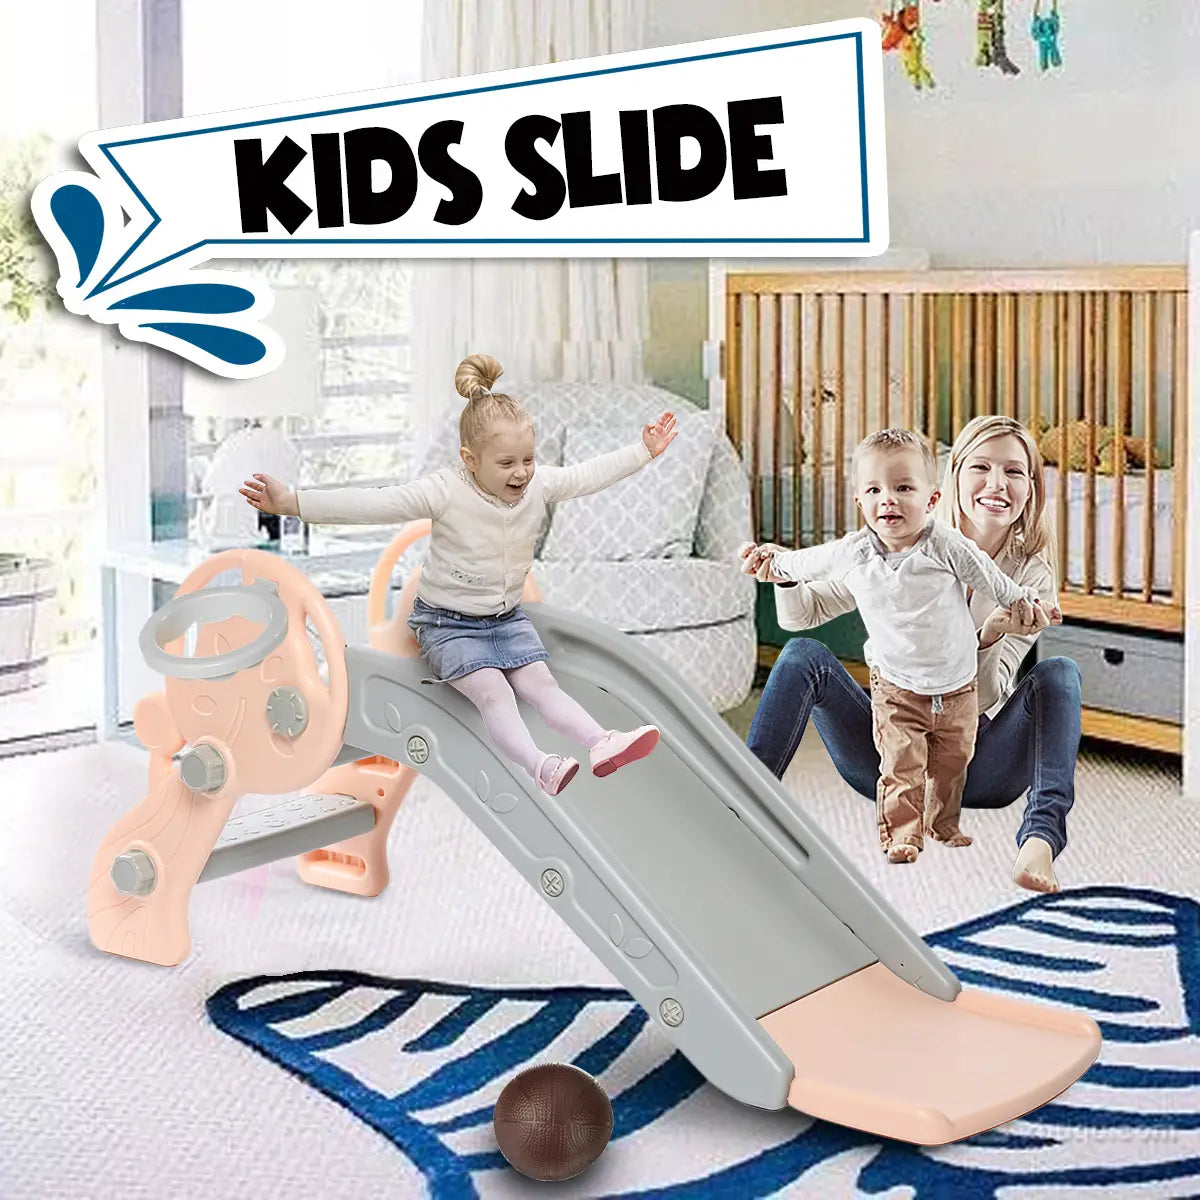 Kids Play Slide Set Climber Indoor Outdoor Playground For